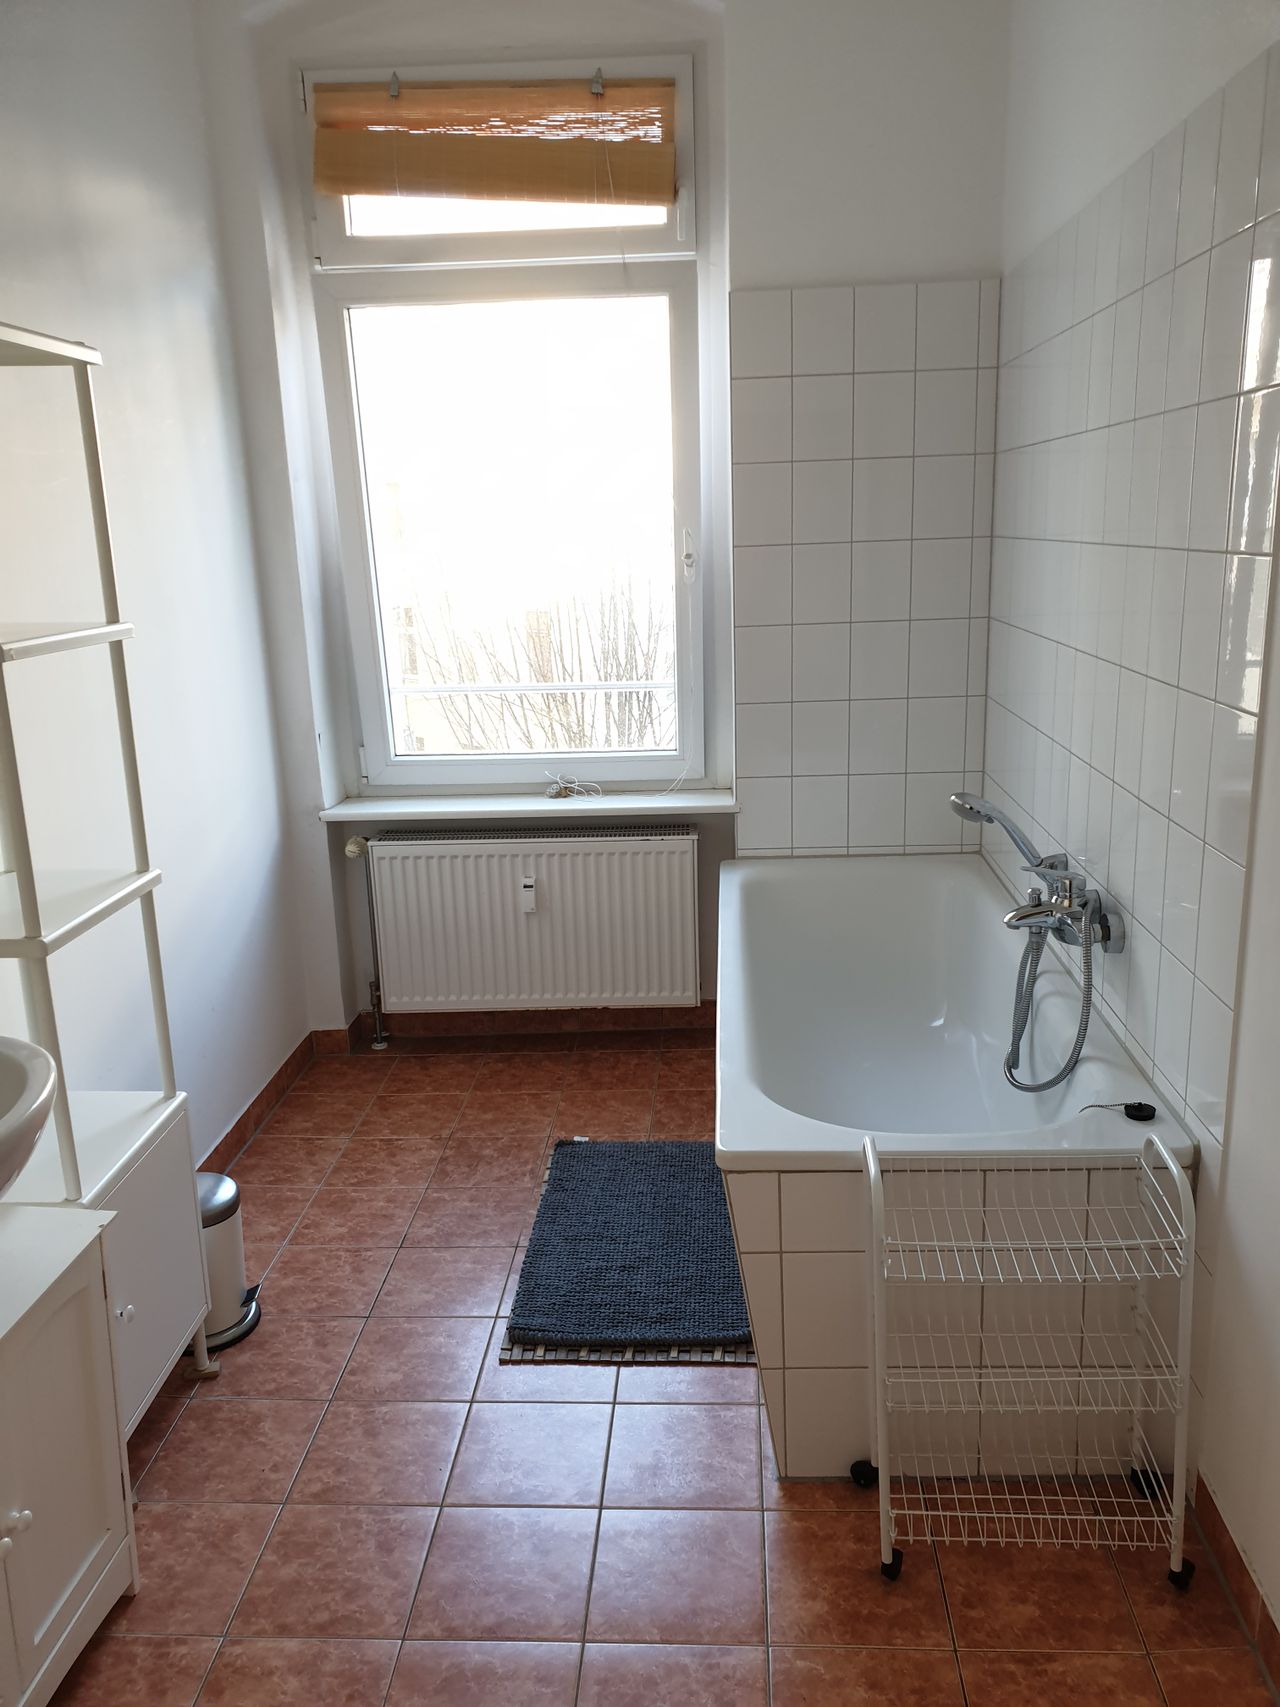 Super central single room flat in Berlin, 2 minutes away from U-Station